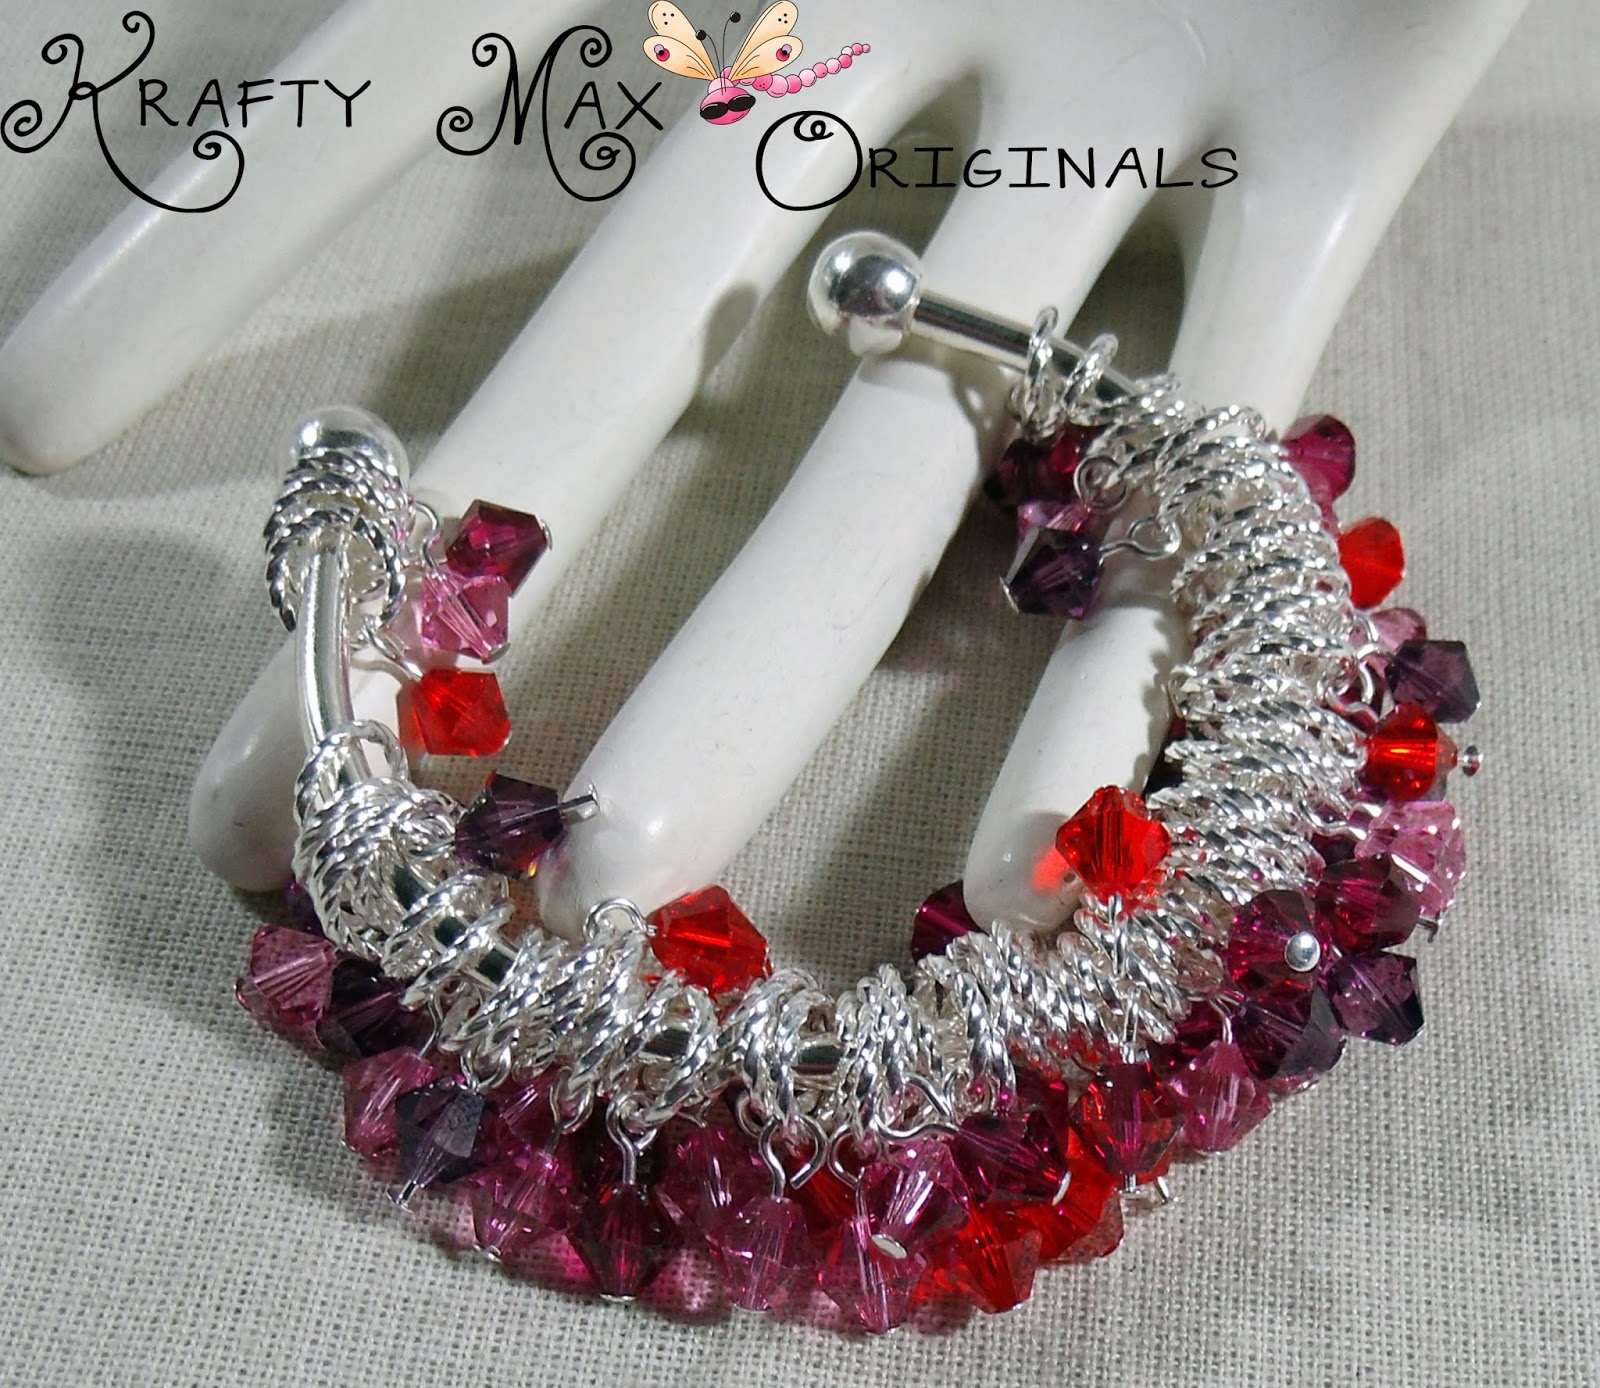 http://www.lajuliet.com/index.php/2013-01-04-15-21-51/ad/bangle,48/exclusive-shades-of-red-s-and-purples-s-handmade-bangle-bracelet-a-krafty-max-original-design,313